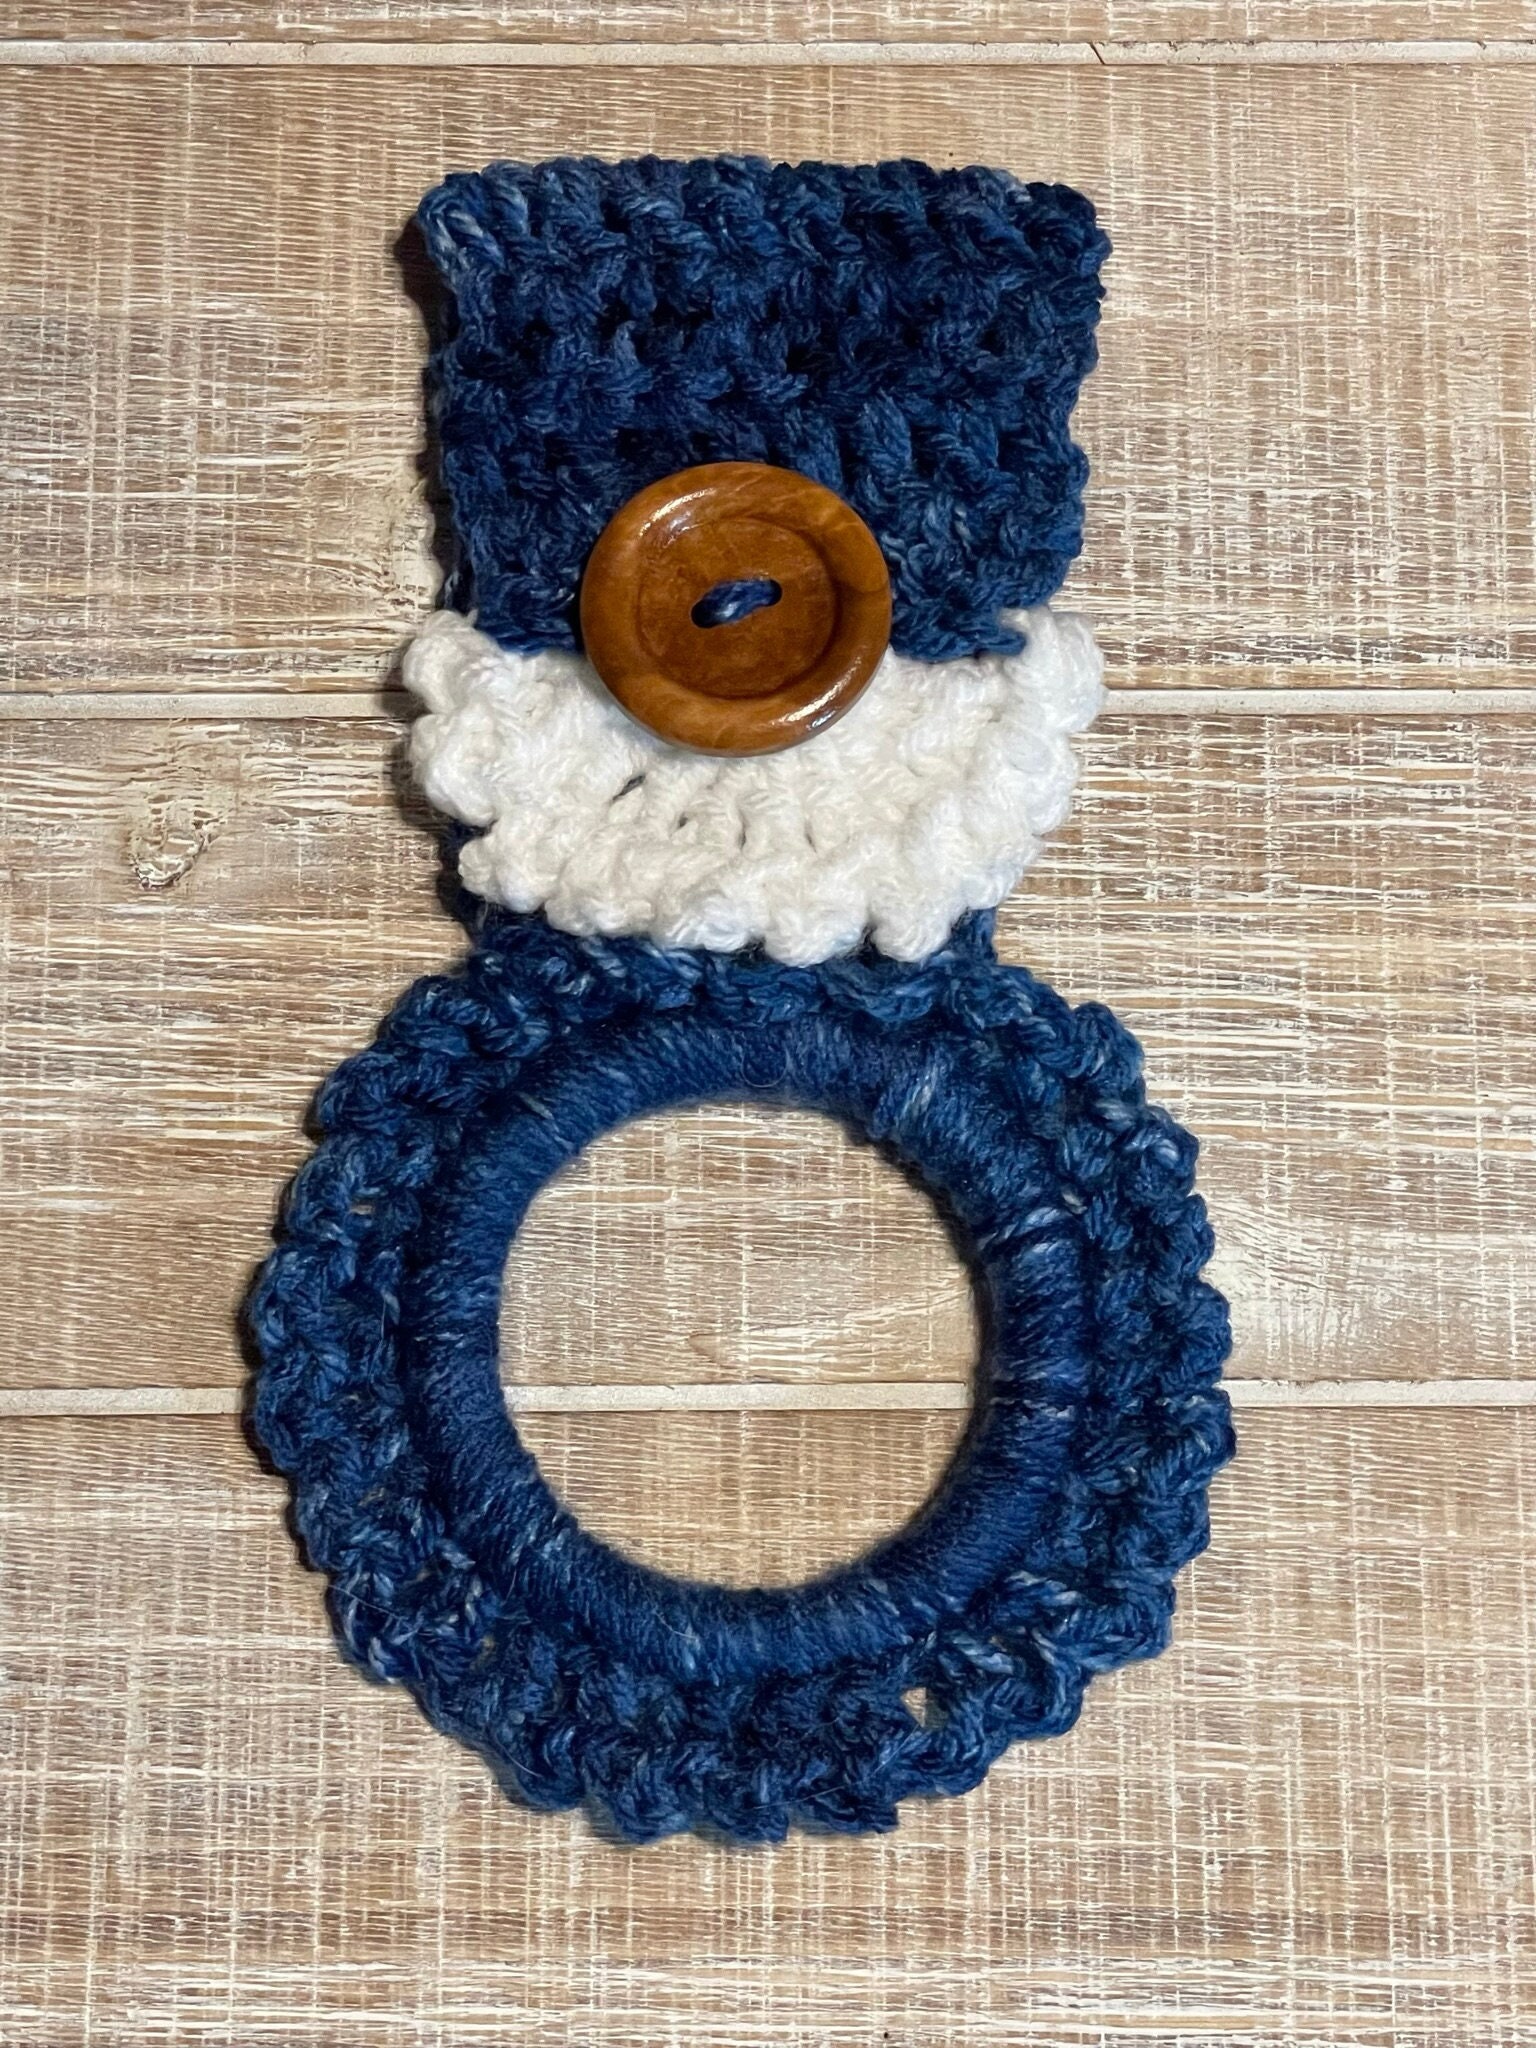 Hand-Knitted Kitchen Towel Holder with Wooden Rings